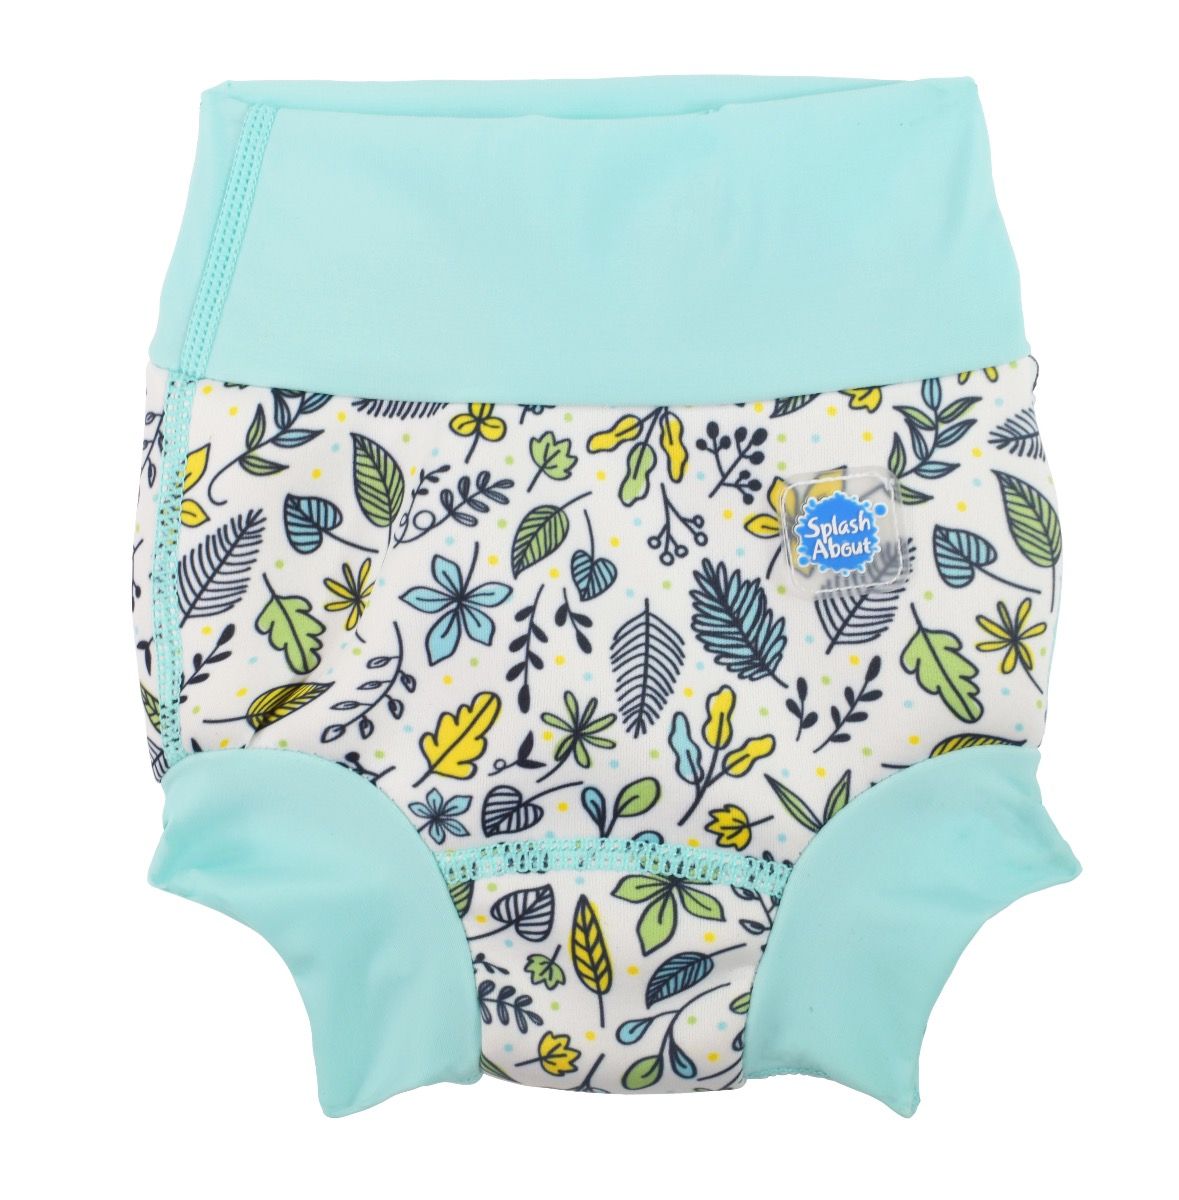 Easy changing Splash About Swim Nappy Liners for use with Happy Nappy 